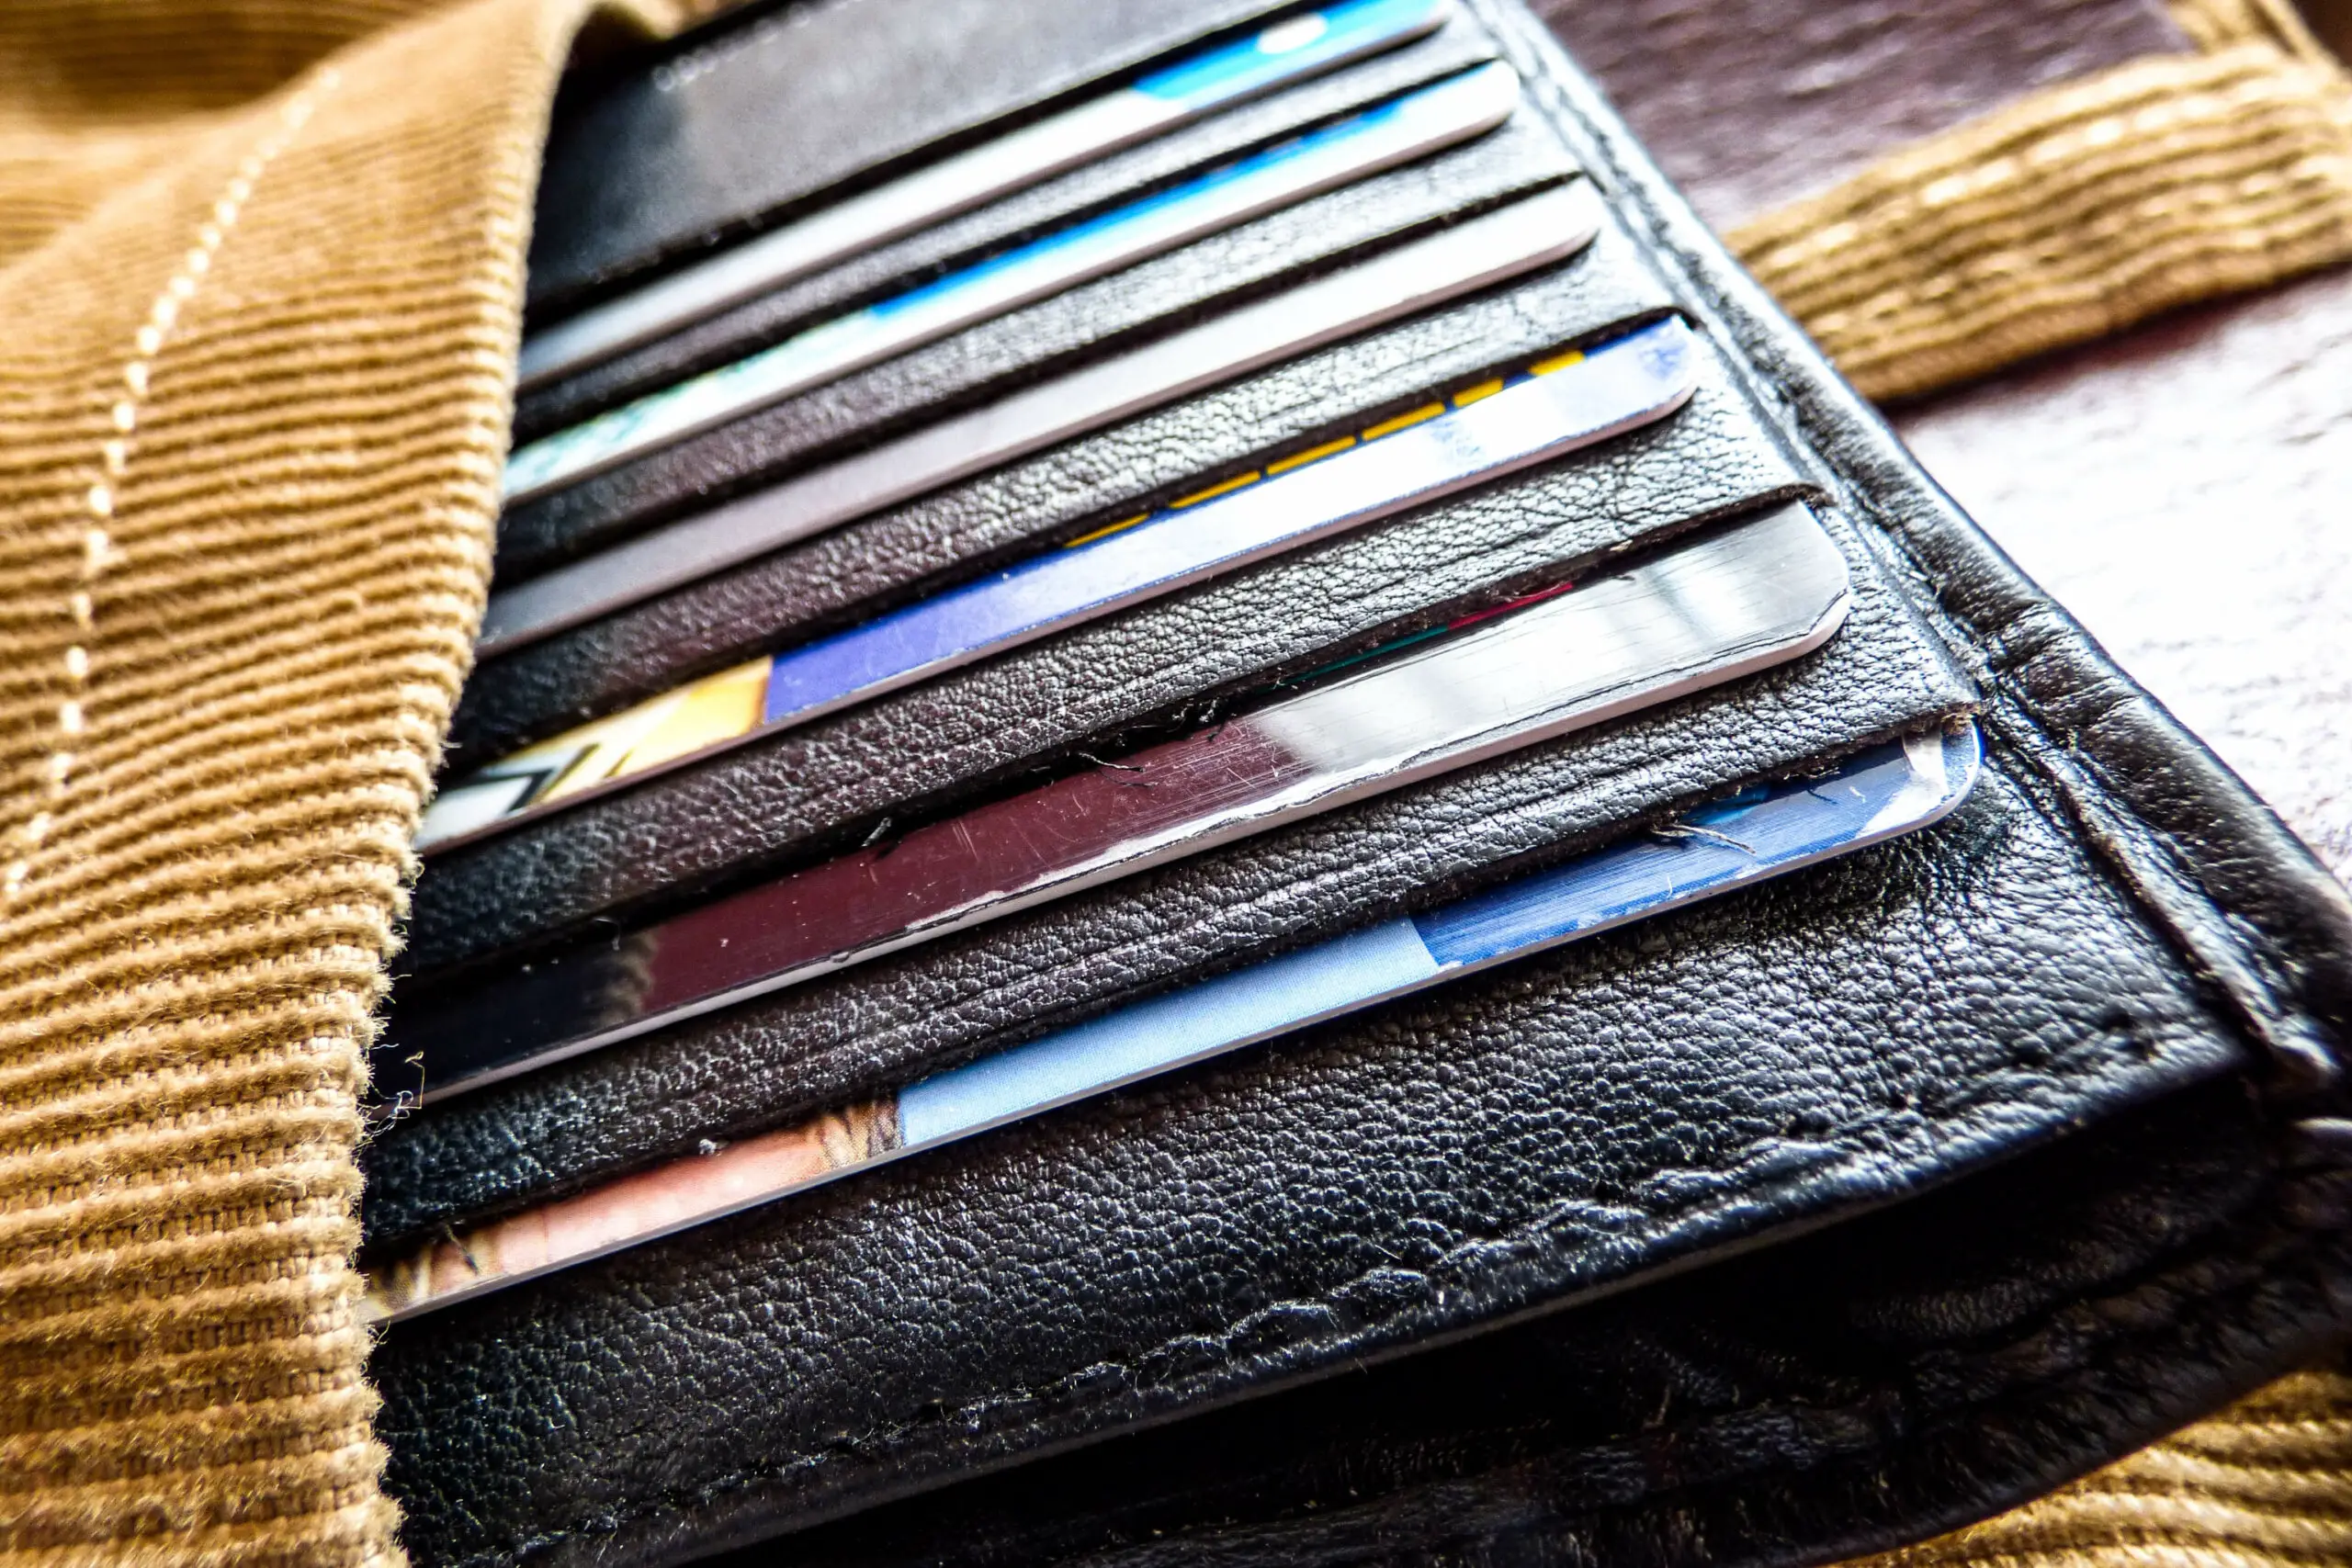 Article: Wallets That Hold a Lot of Cards